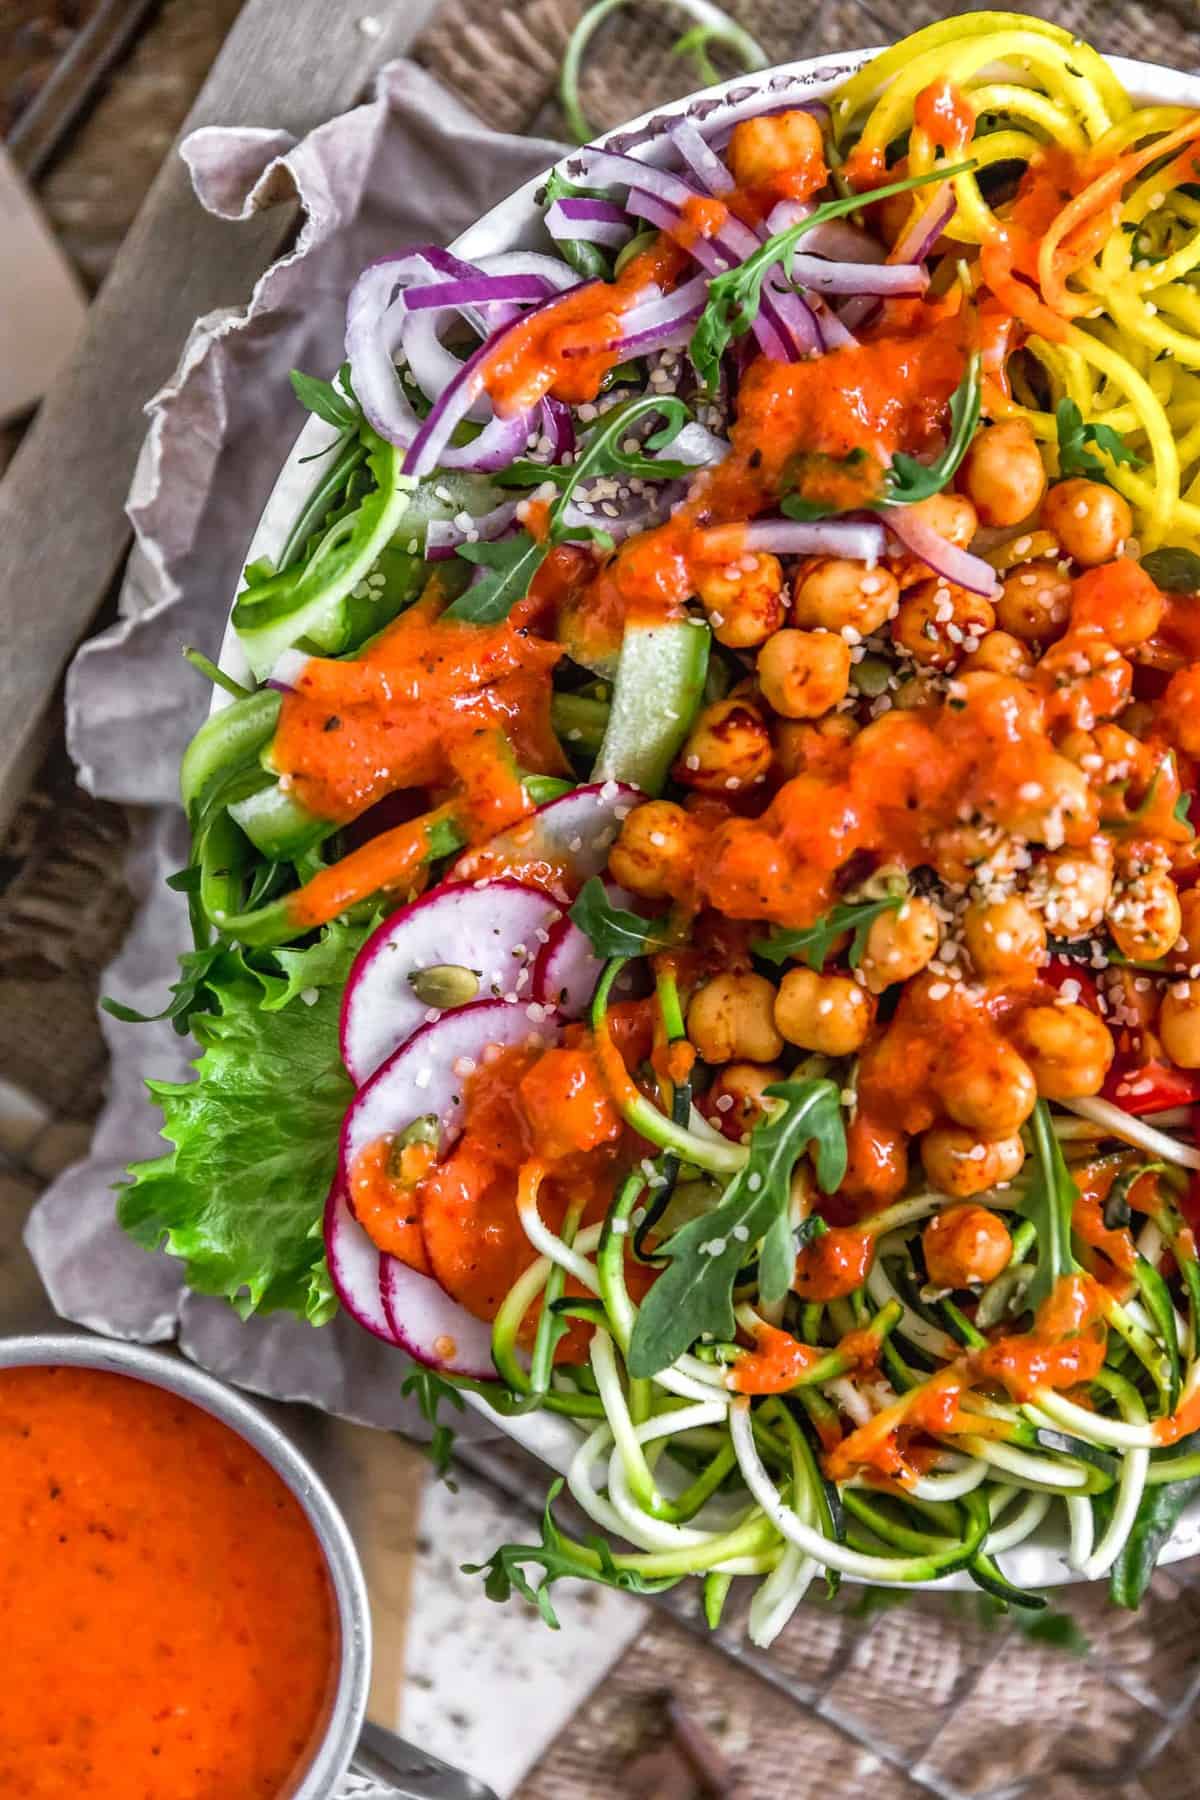 Salad with Roasted Red Pepper Vinaigrette